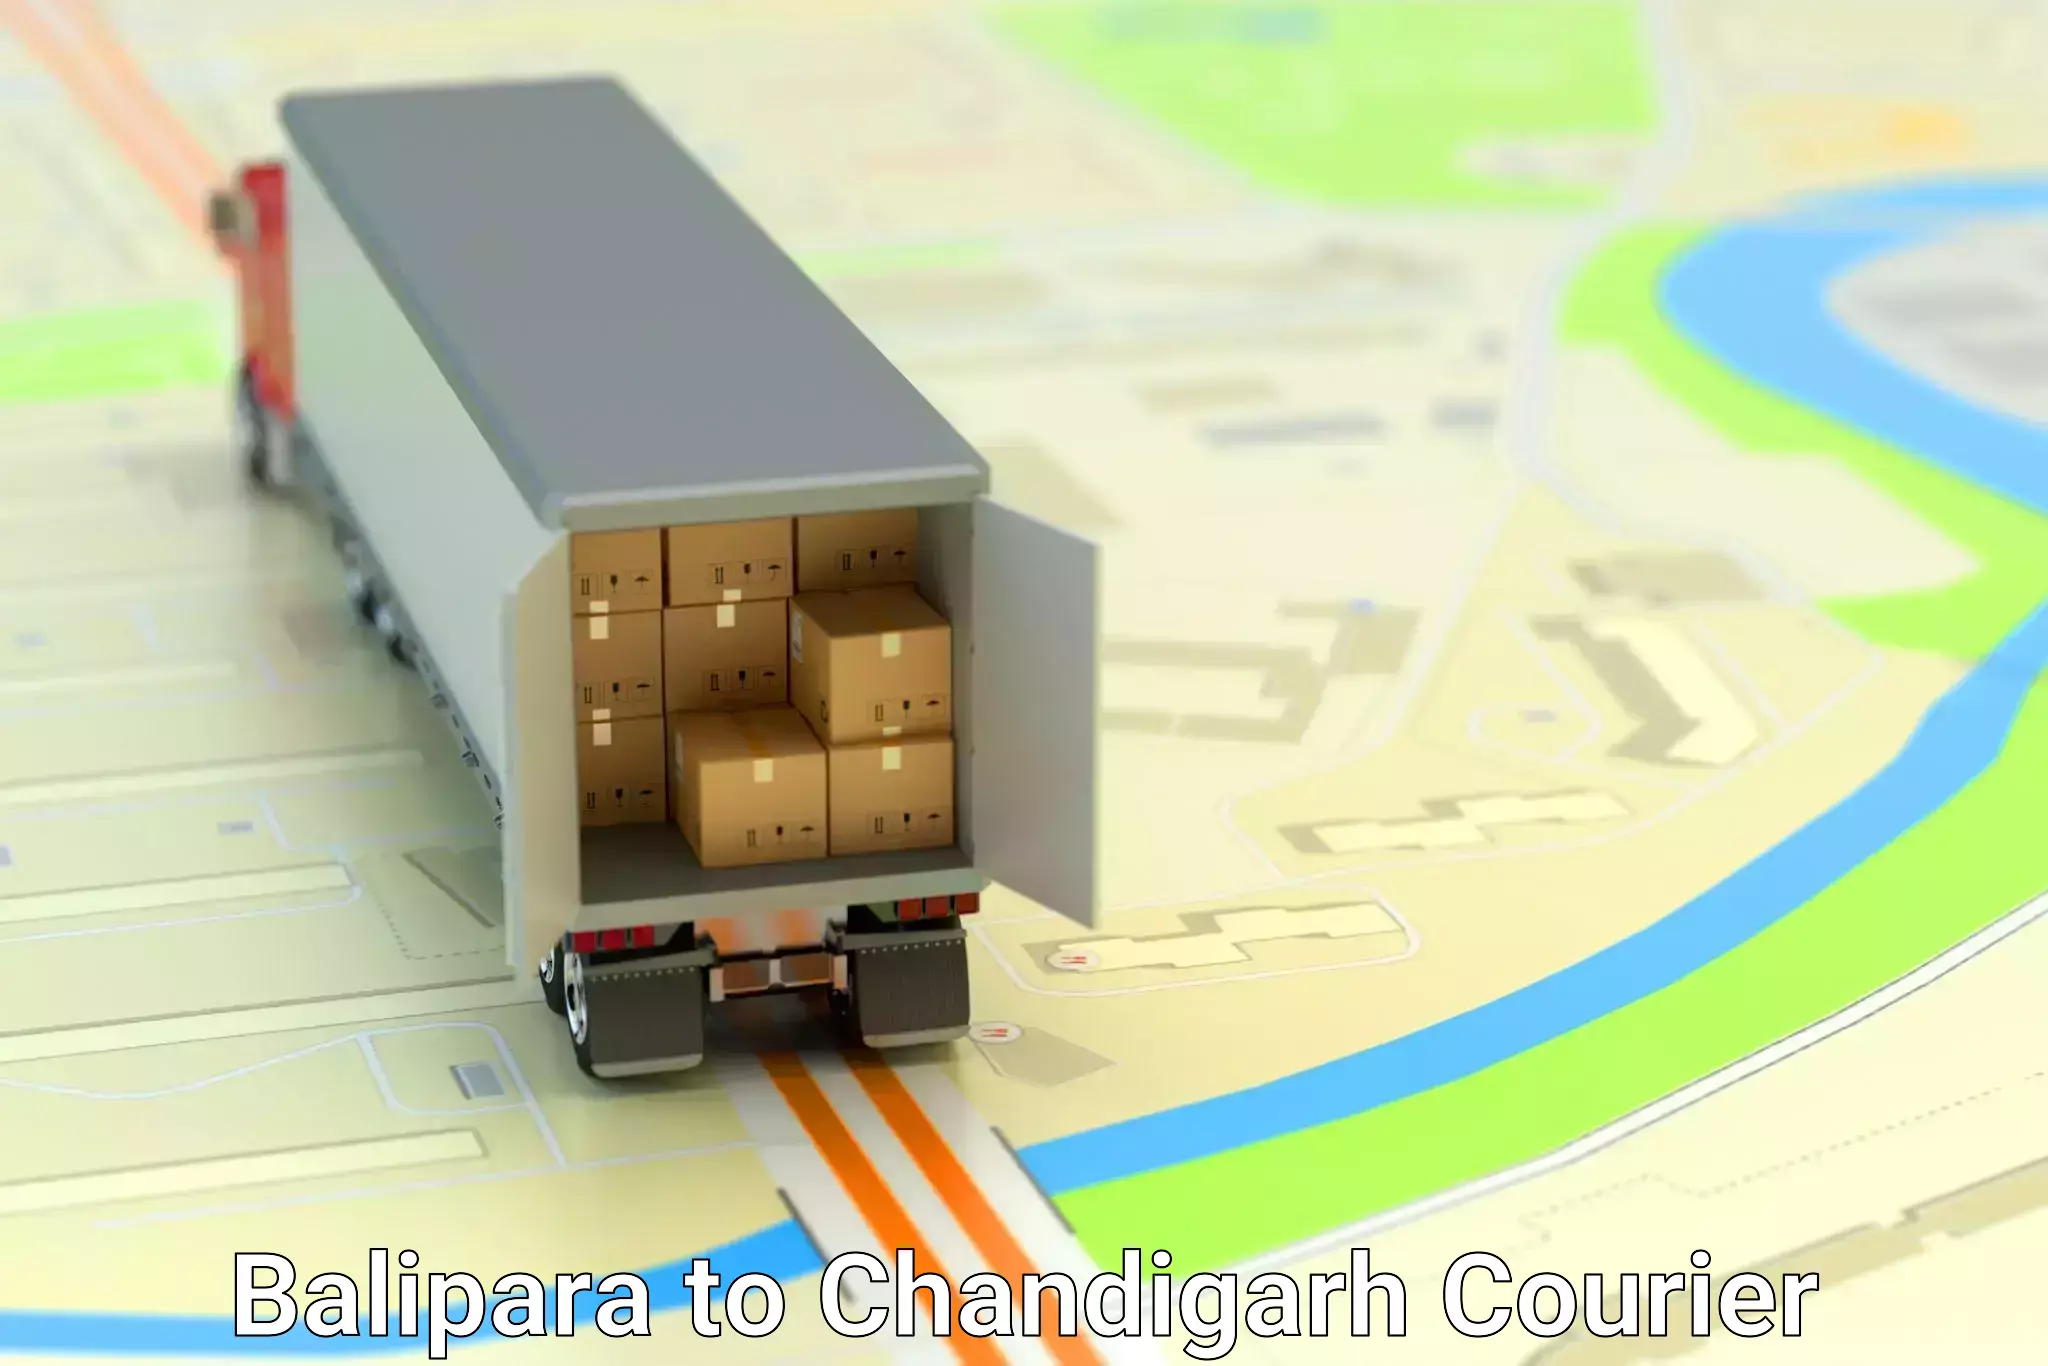 Package delivery network Balipara to Chandigarh